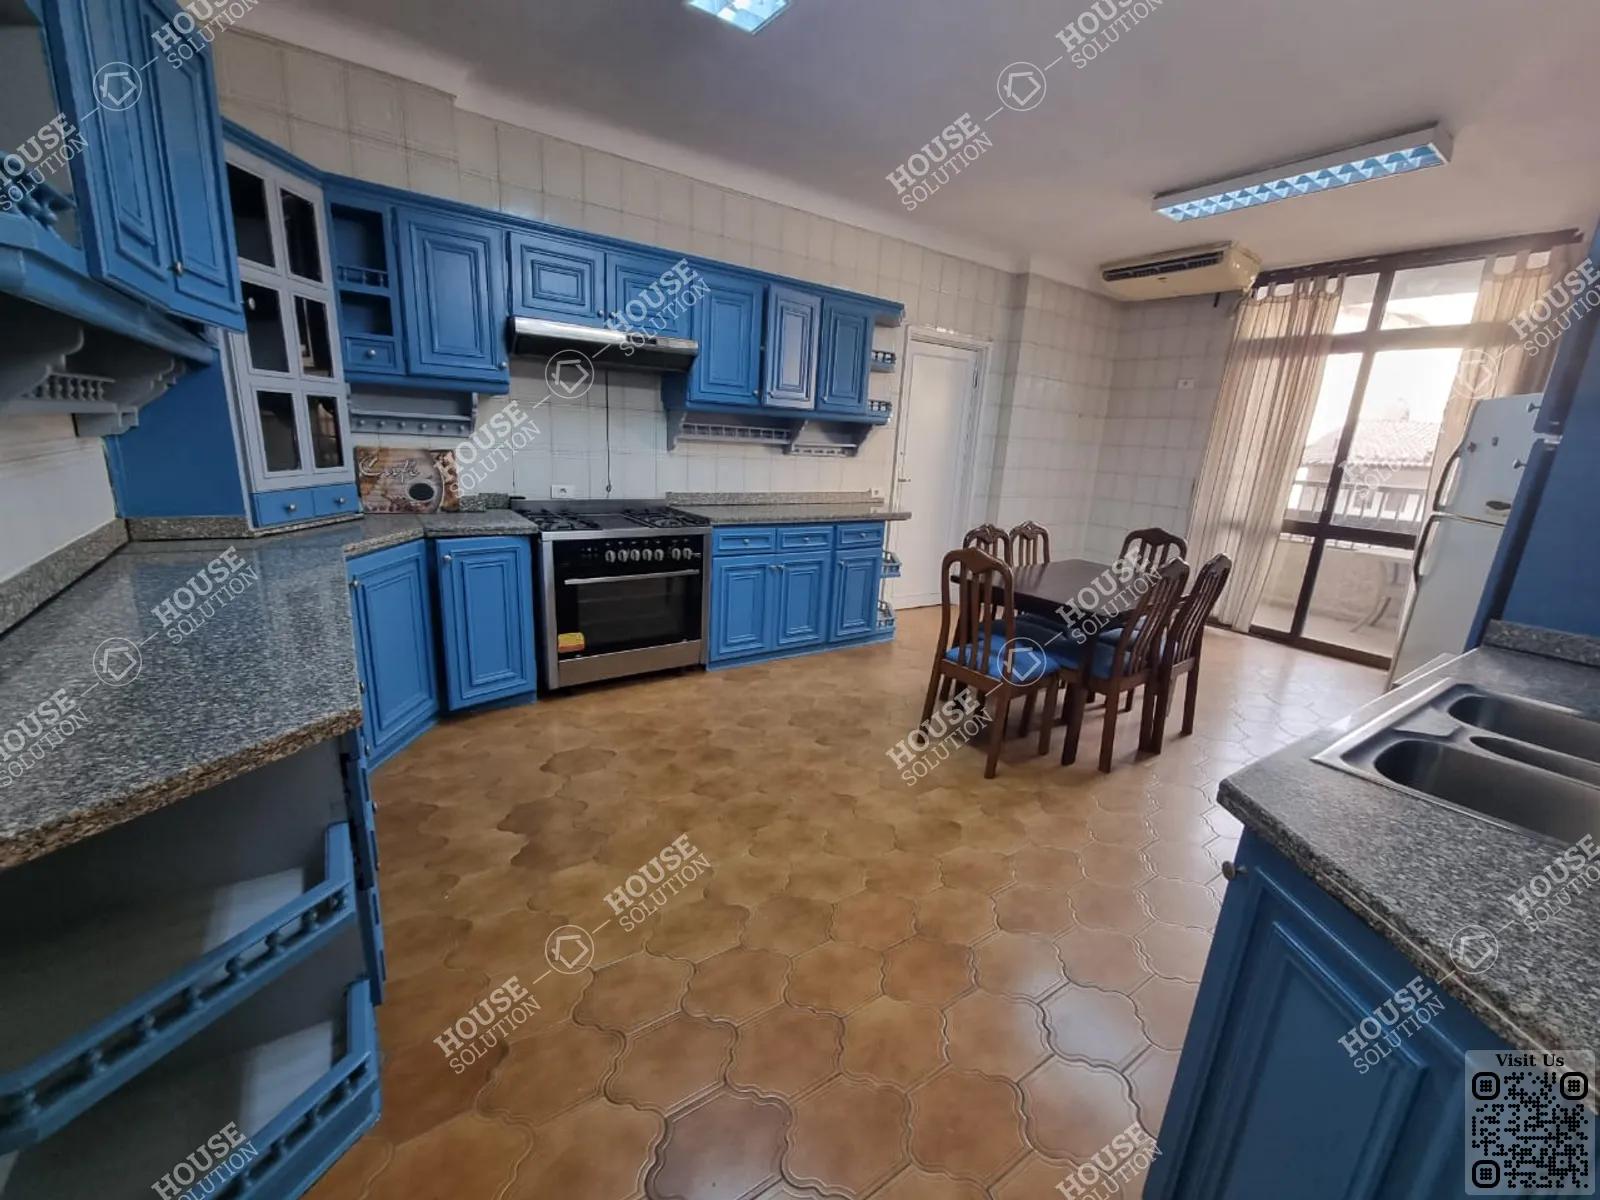 KITCHEN  @ Apartments For Rent In Maadi Maadi Sarayat Area: 265 m² consists of 4 Bedrooms 3 Bathrooms Modern furnished 5 stars #5677-2